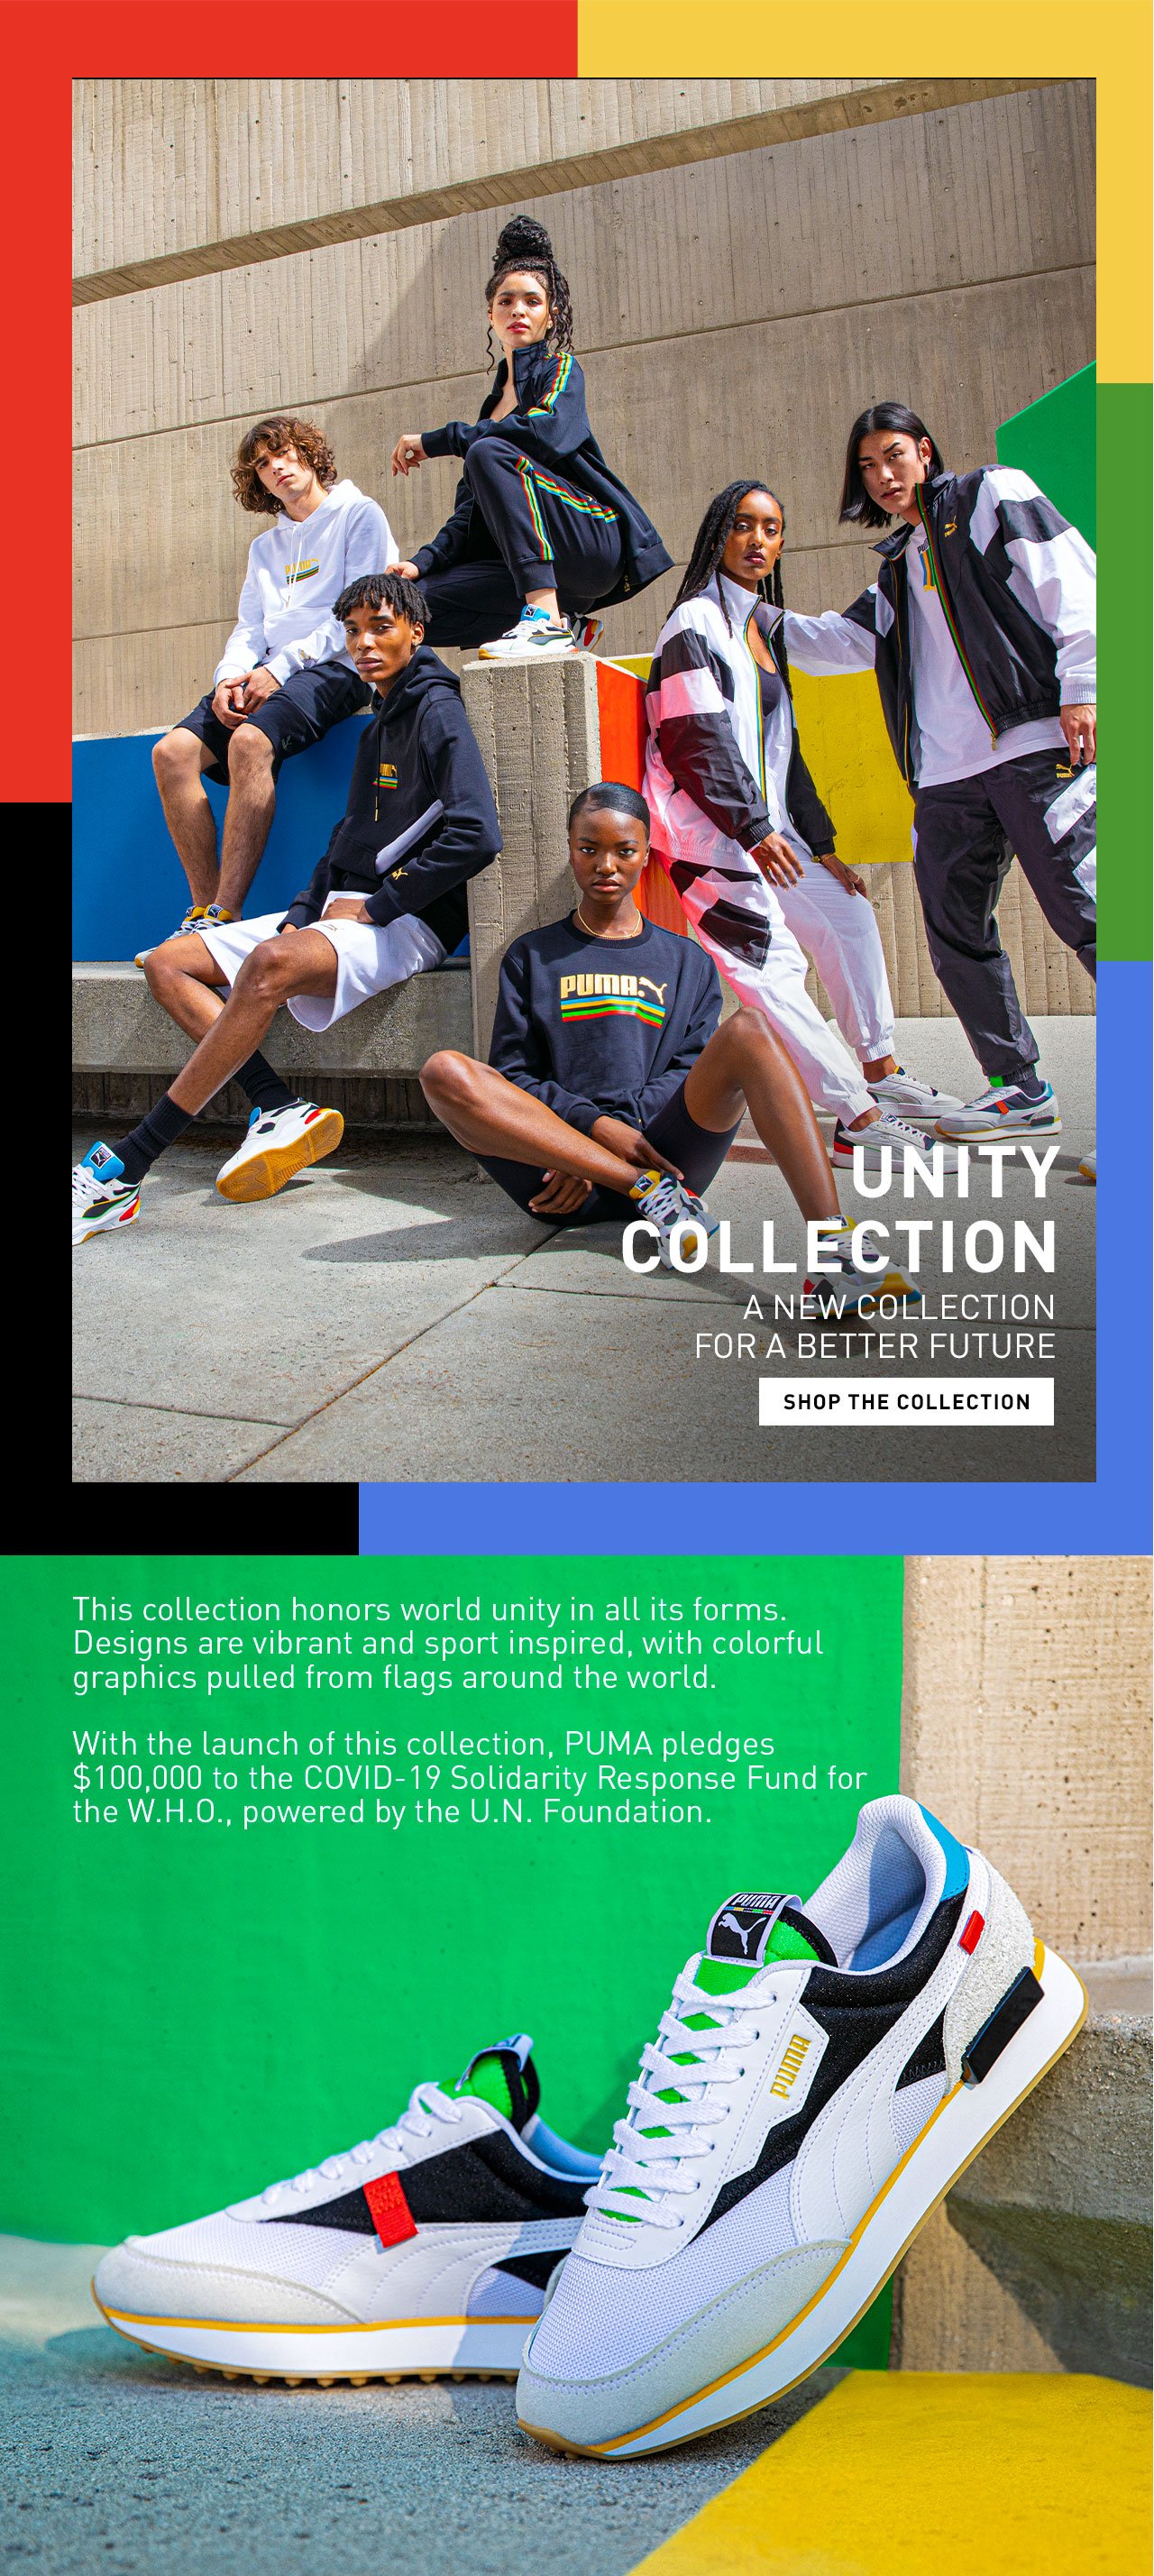 Puma: A new collection inspired by 